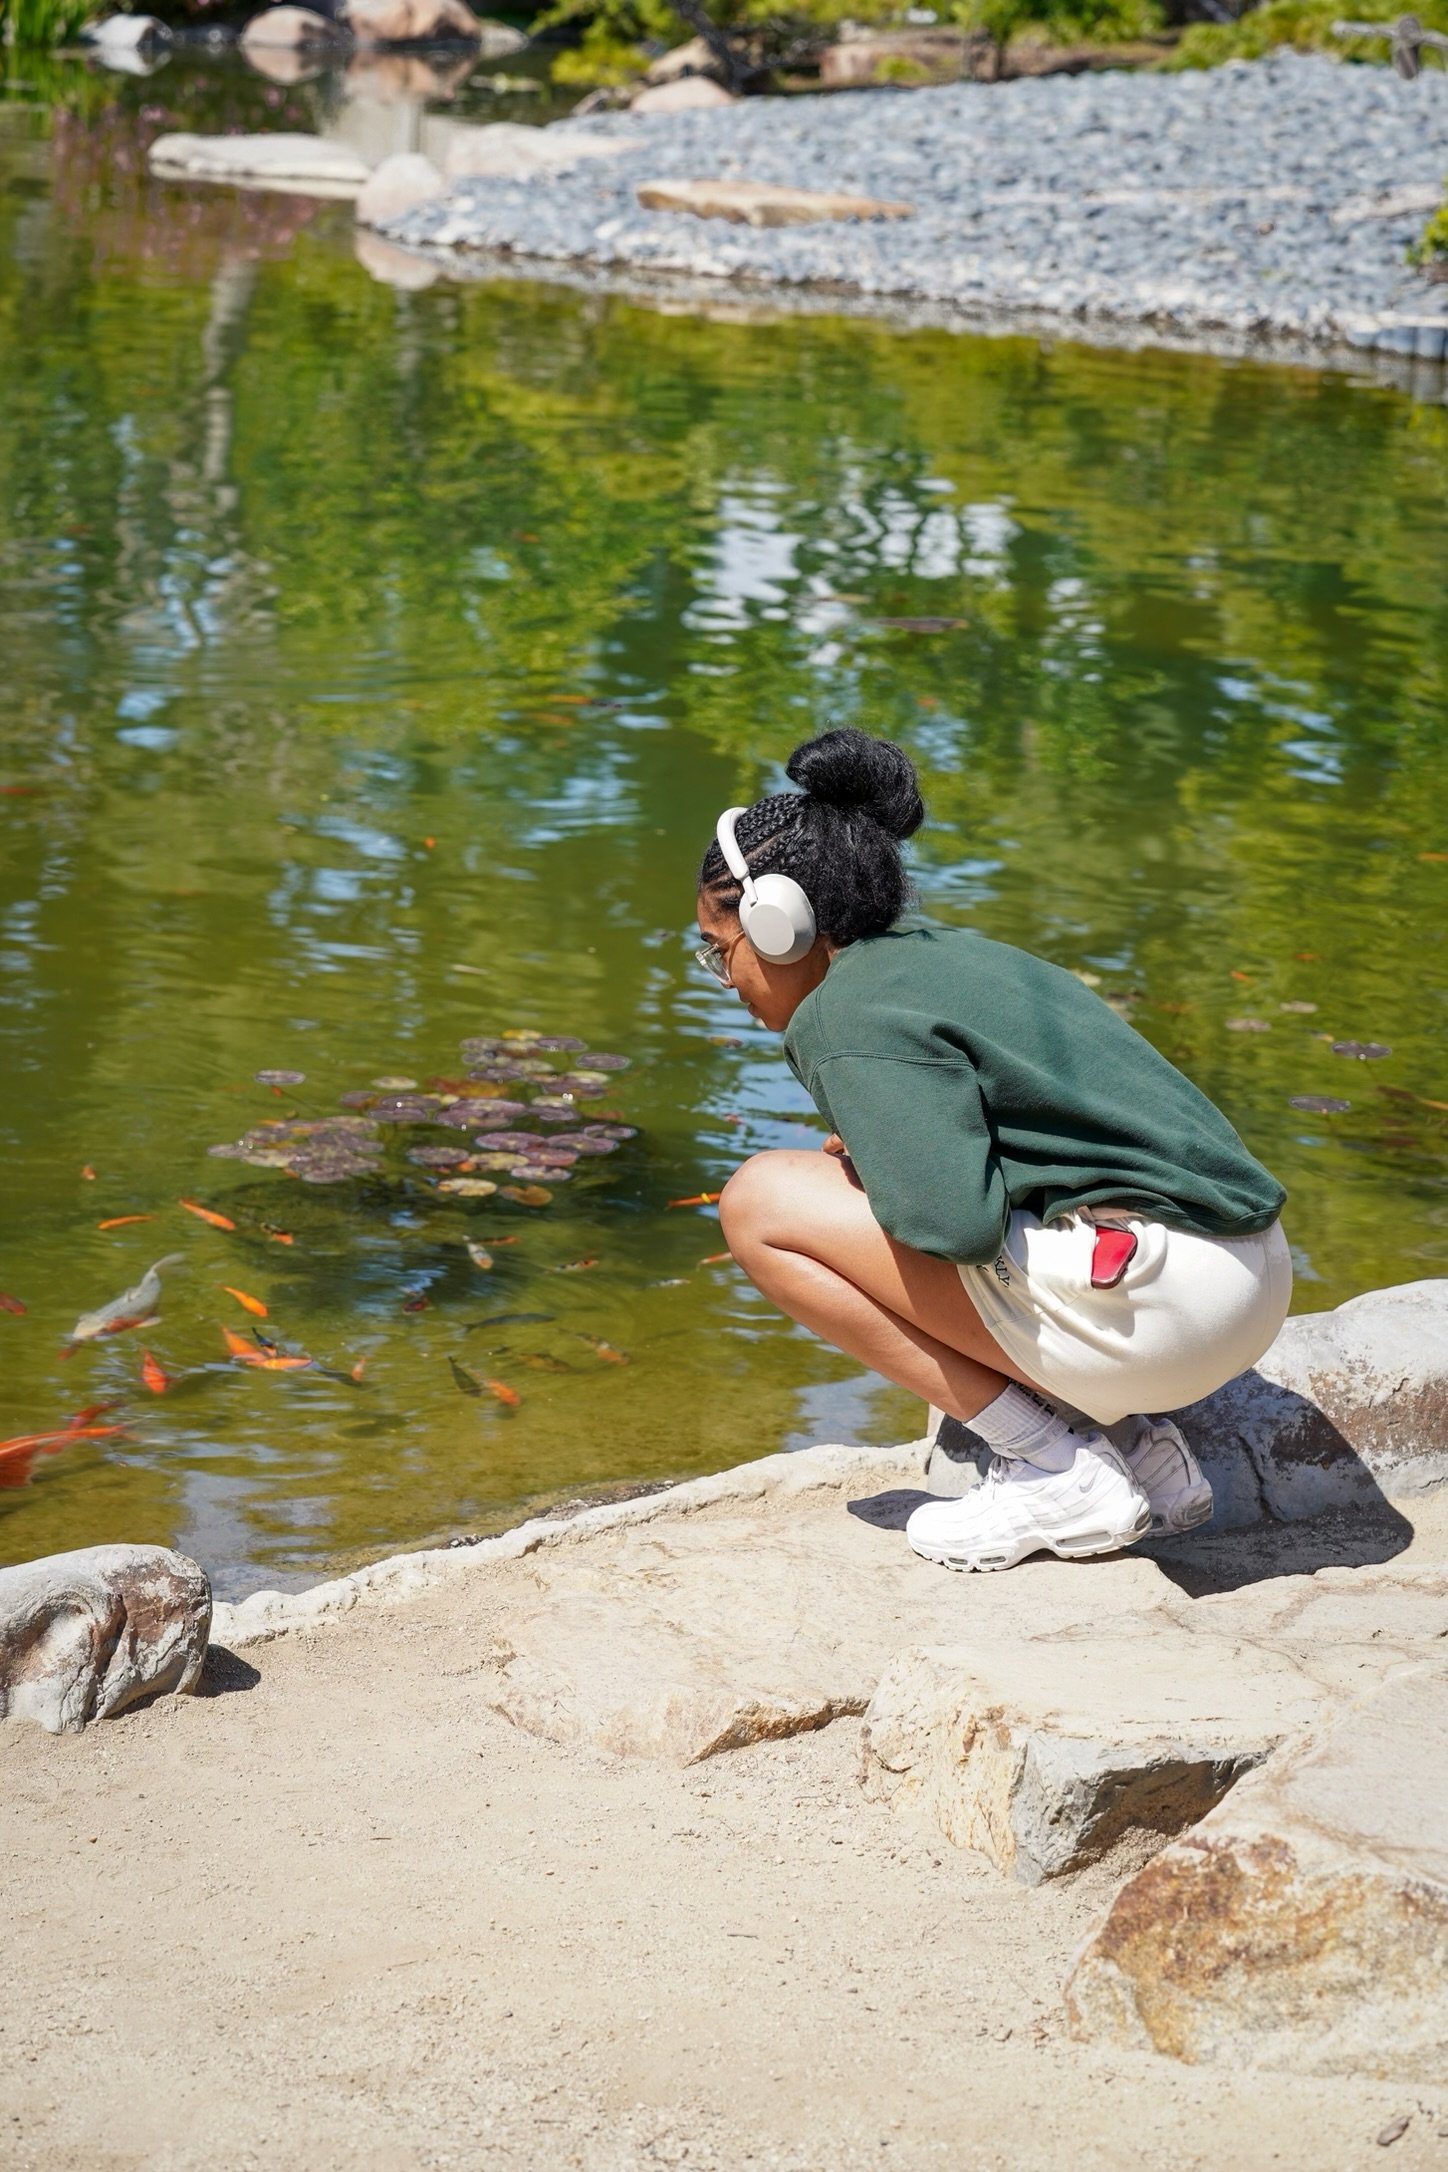  Sydney Woodley crouches at the edge of the pond to observe the baby koi fish. Photo by Kimberly Carrillo 